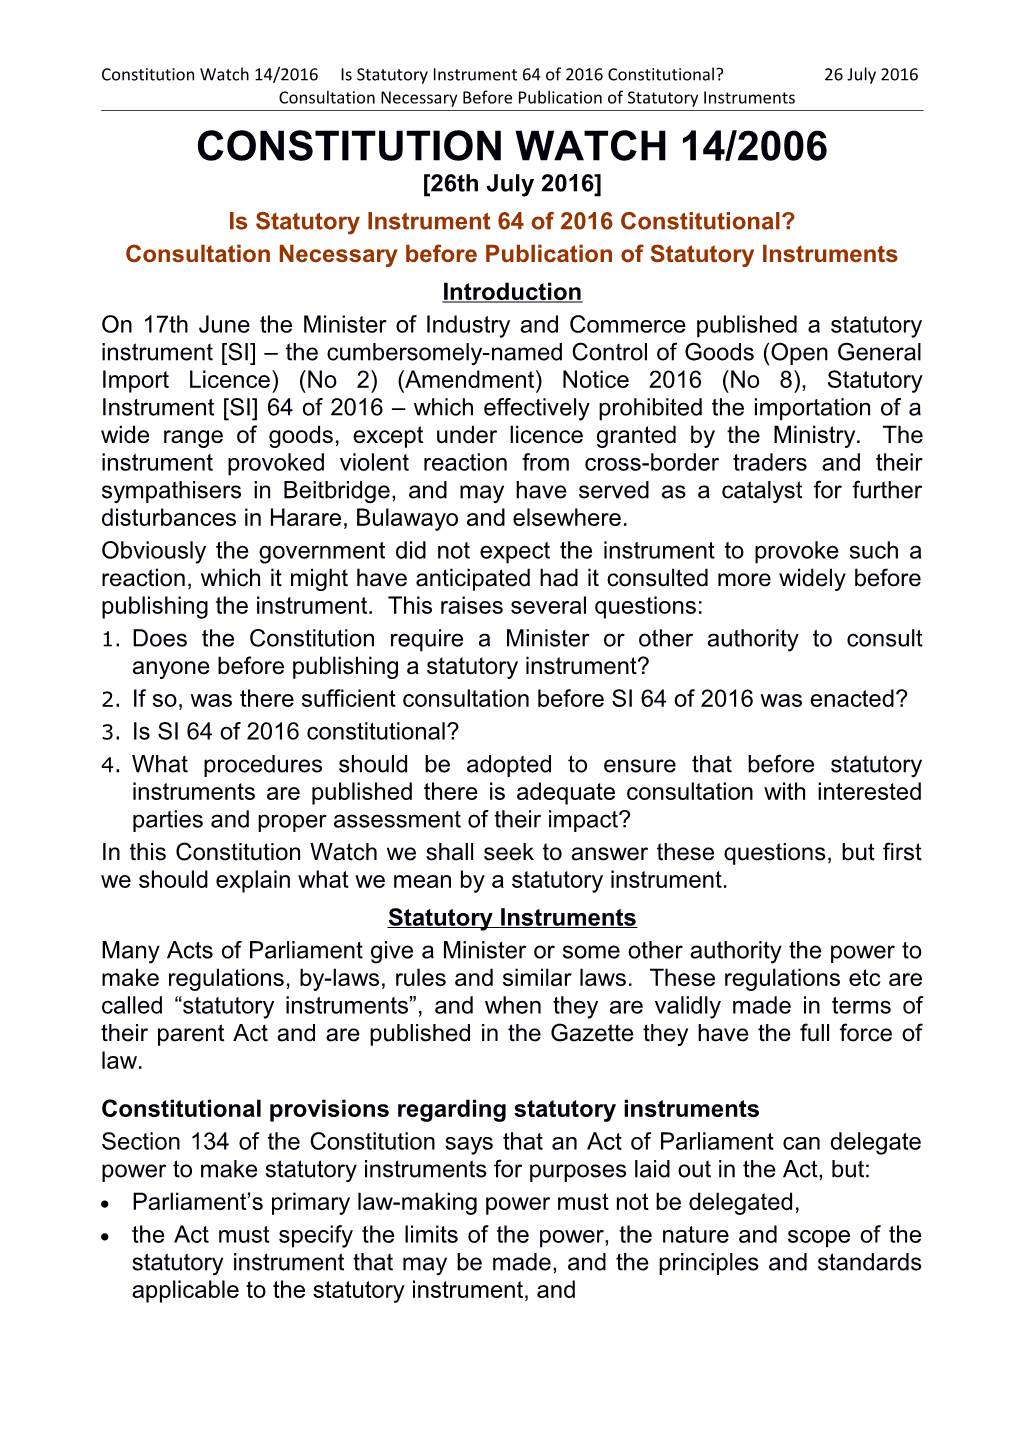 Consultation Necessary Before Publication of Statutory Instruments